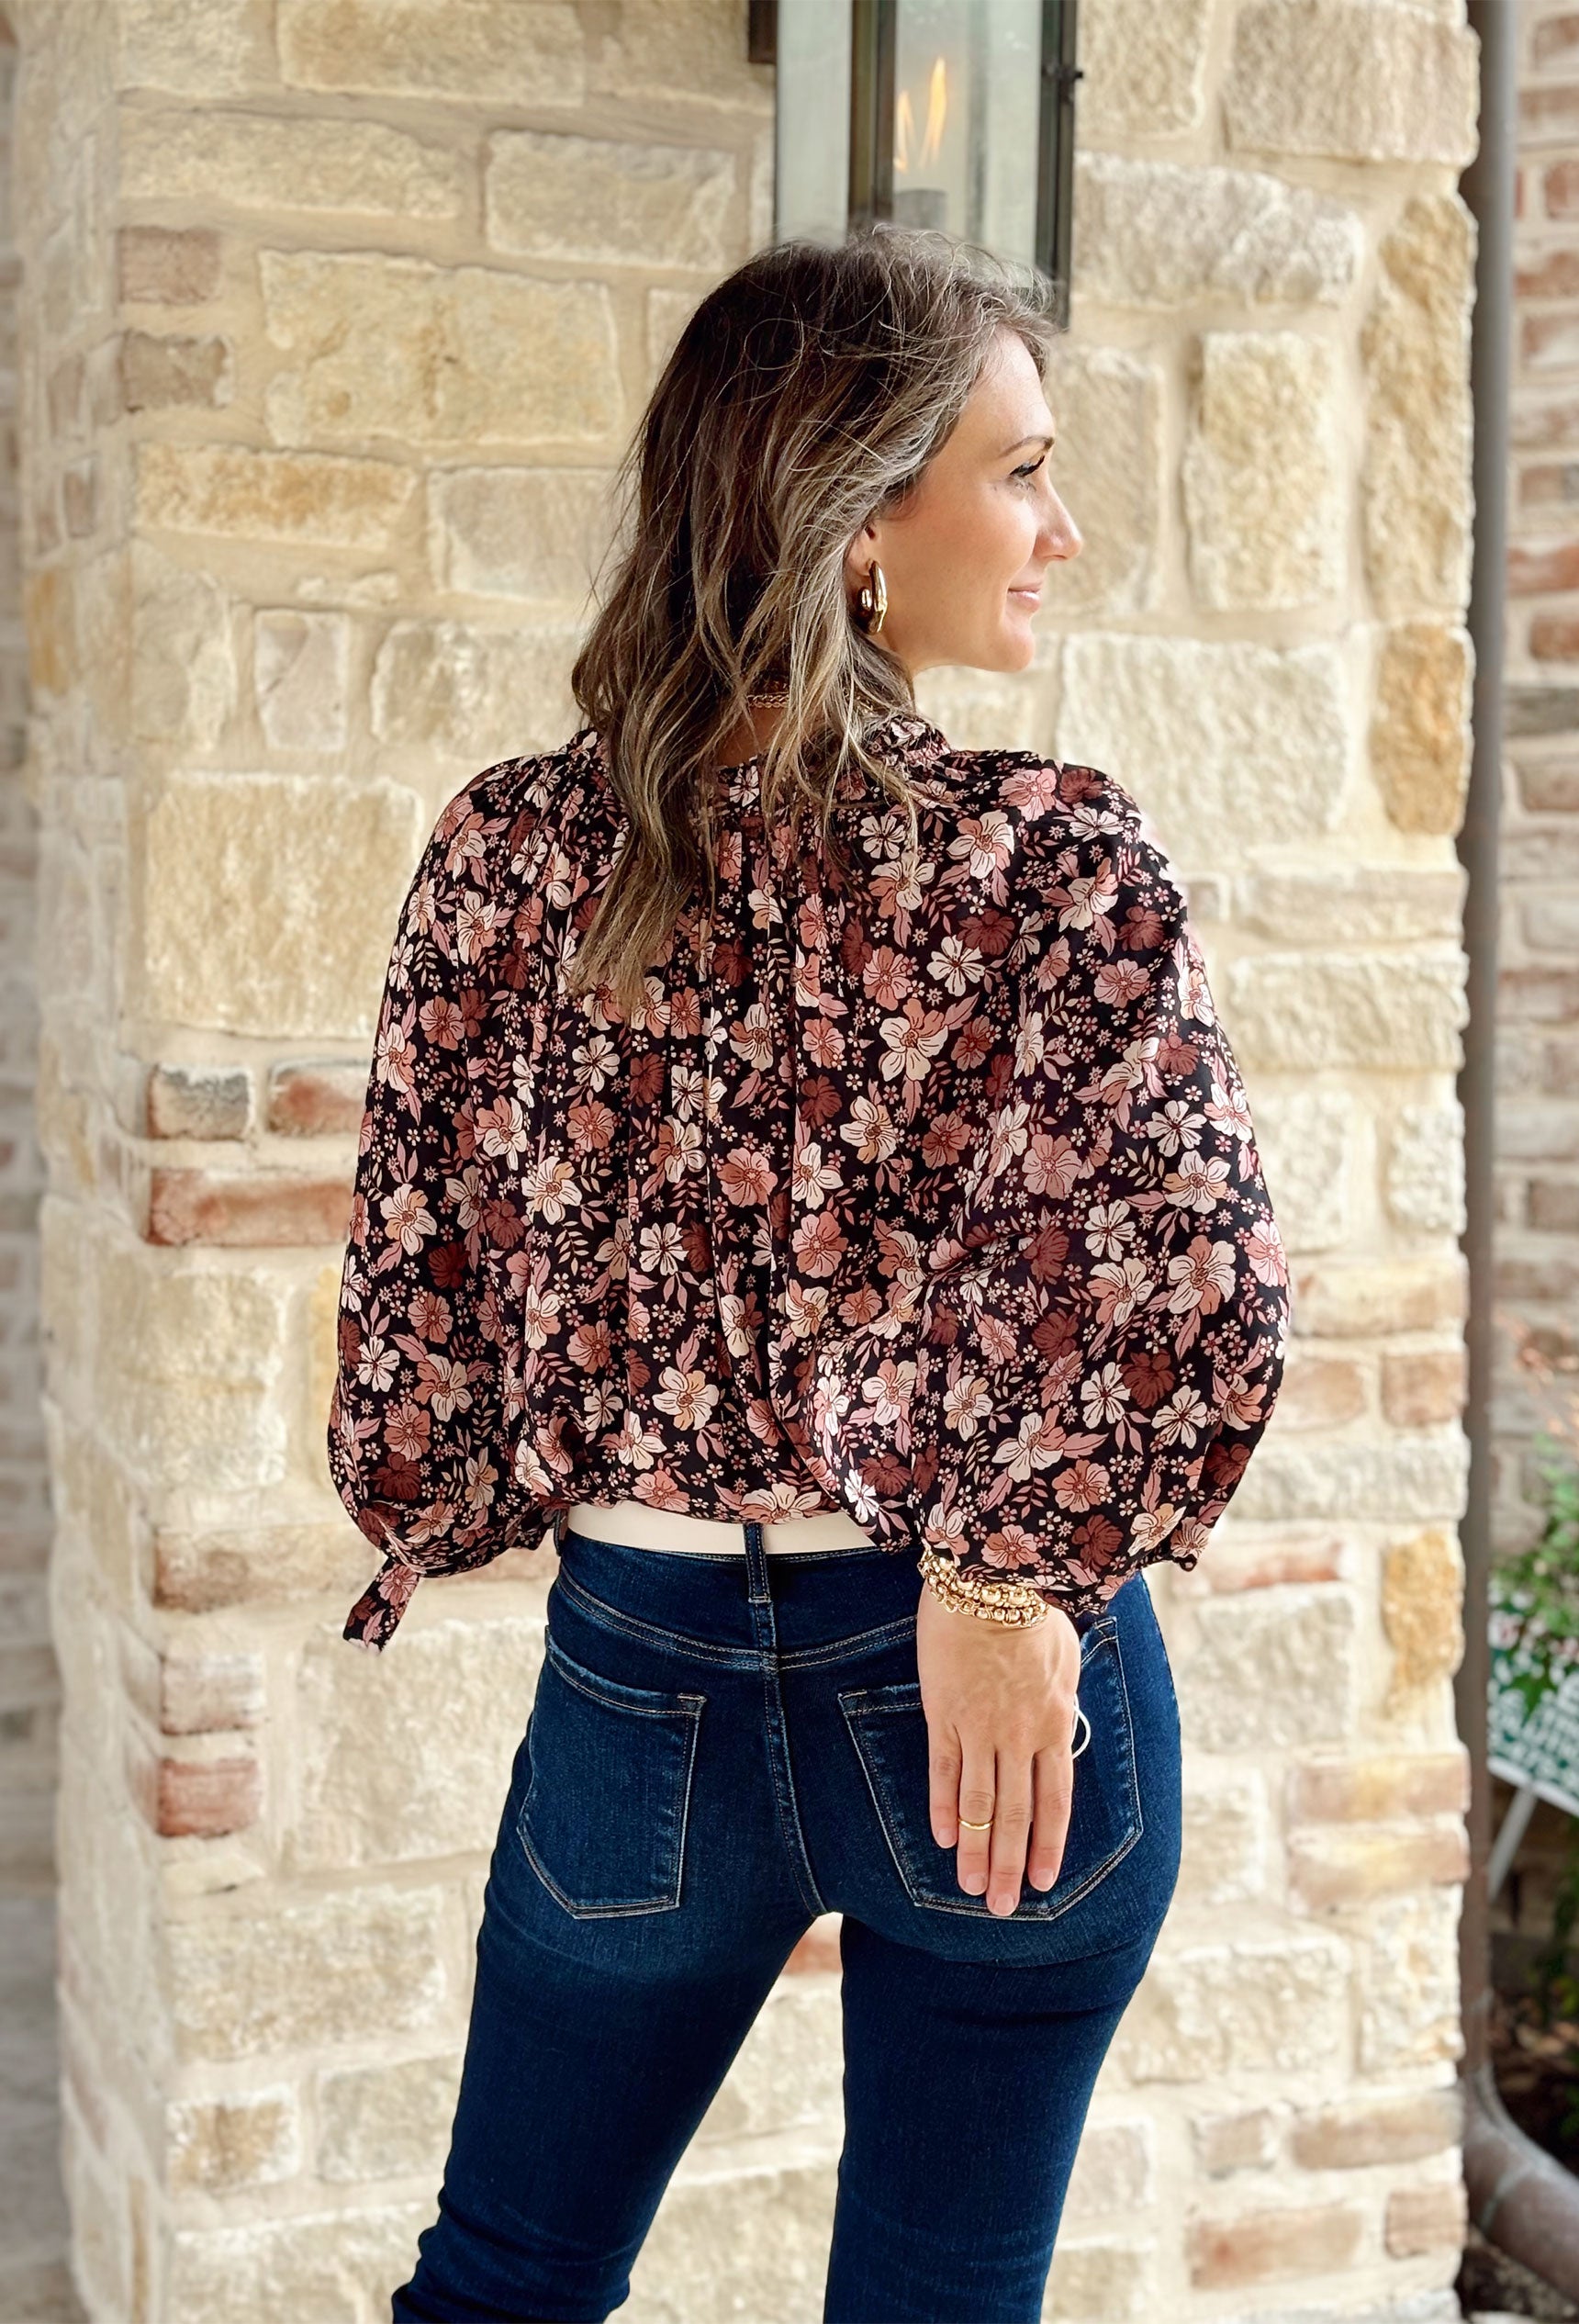 My Wishes Floral Blouse, black blouse with mauve, light pink, and terracotta floral printing on it